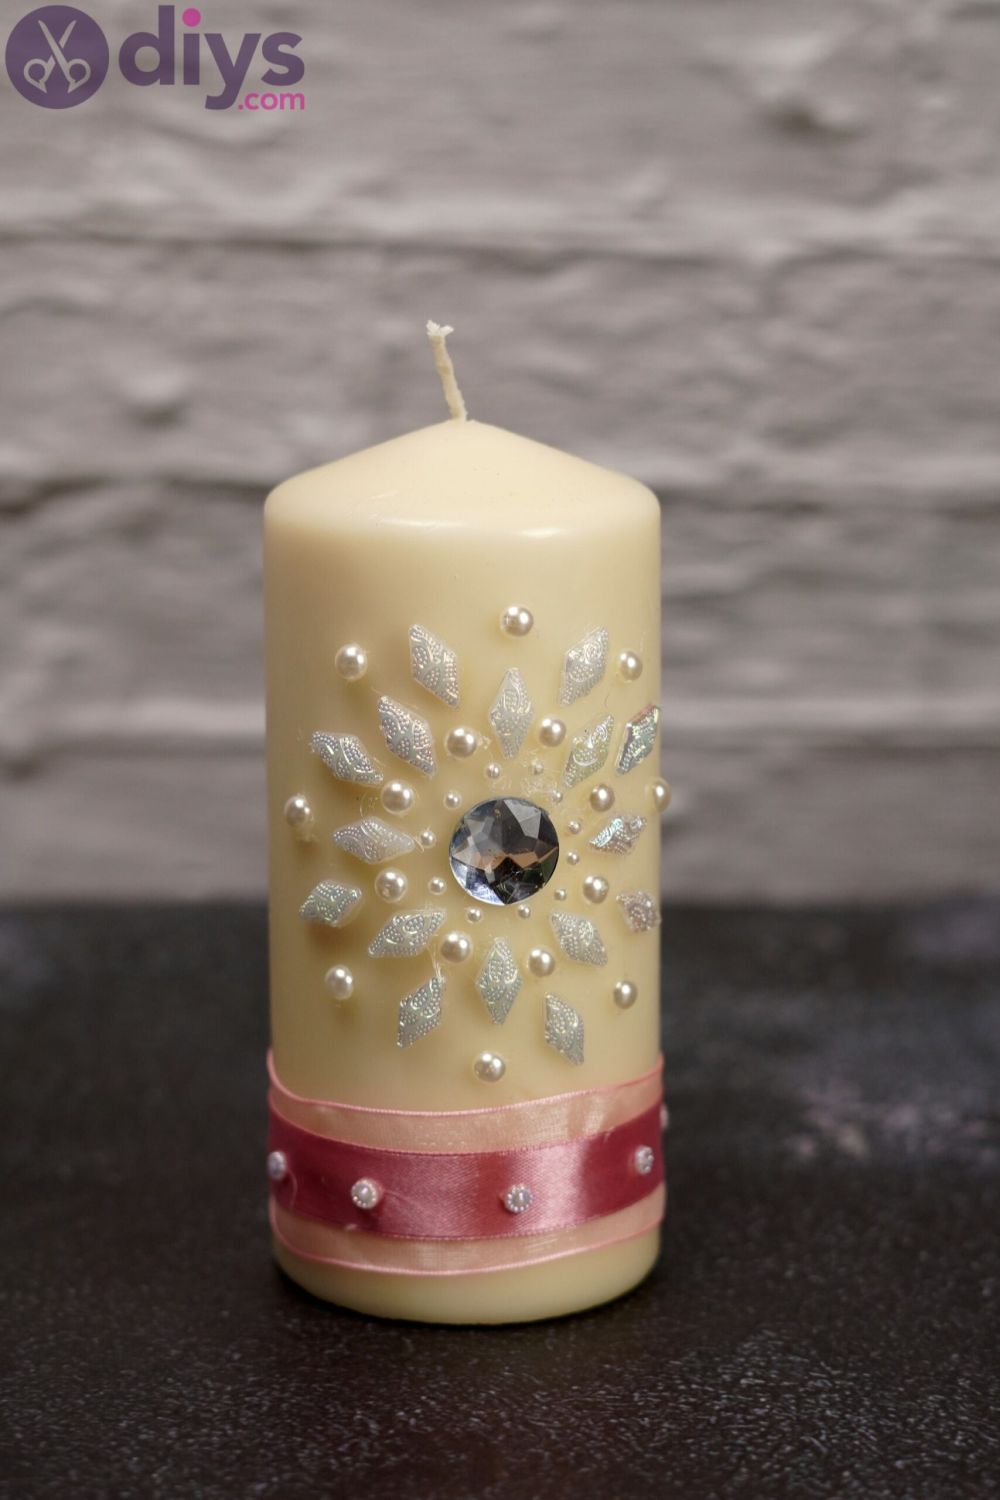 Diy sparkly candle